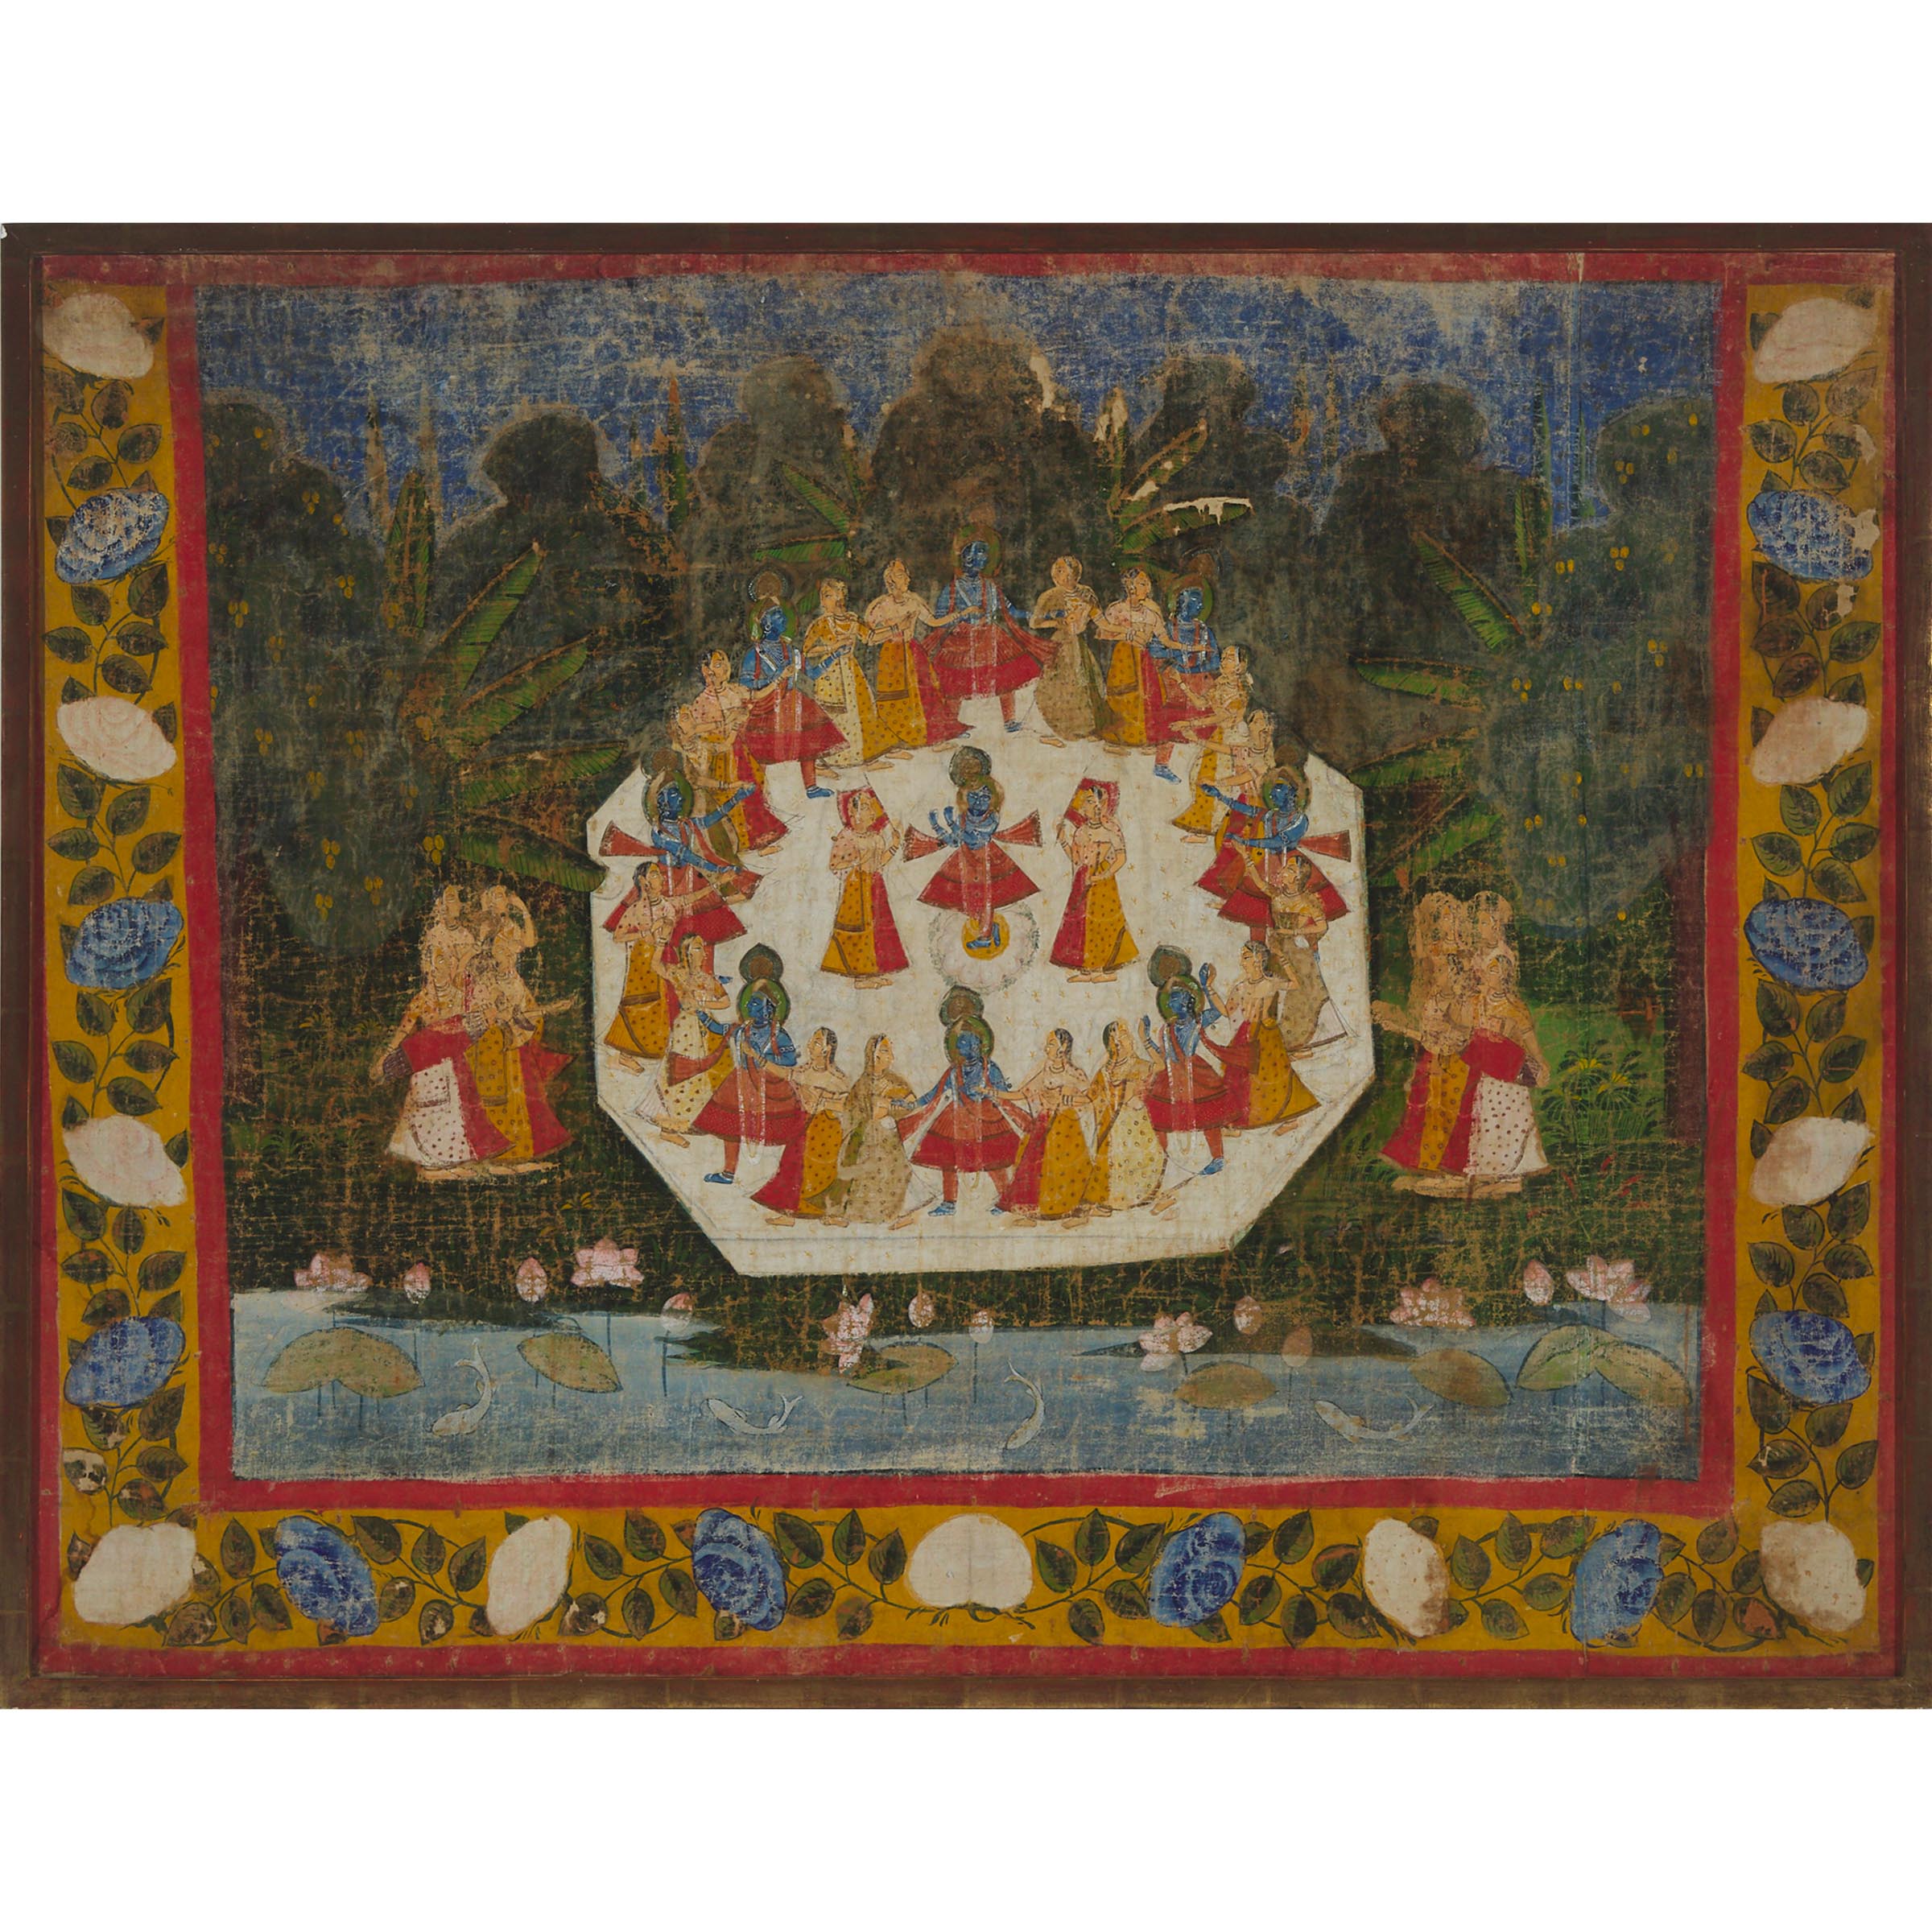 A Picchvai Depicting the Rasalila, 19th Century